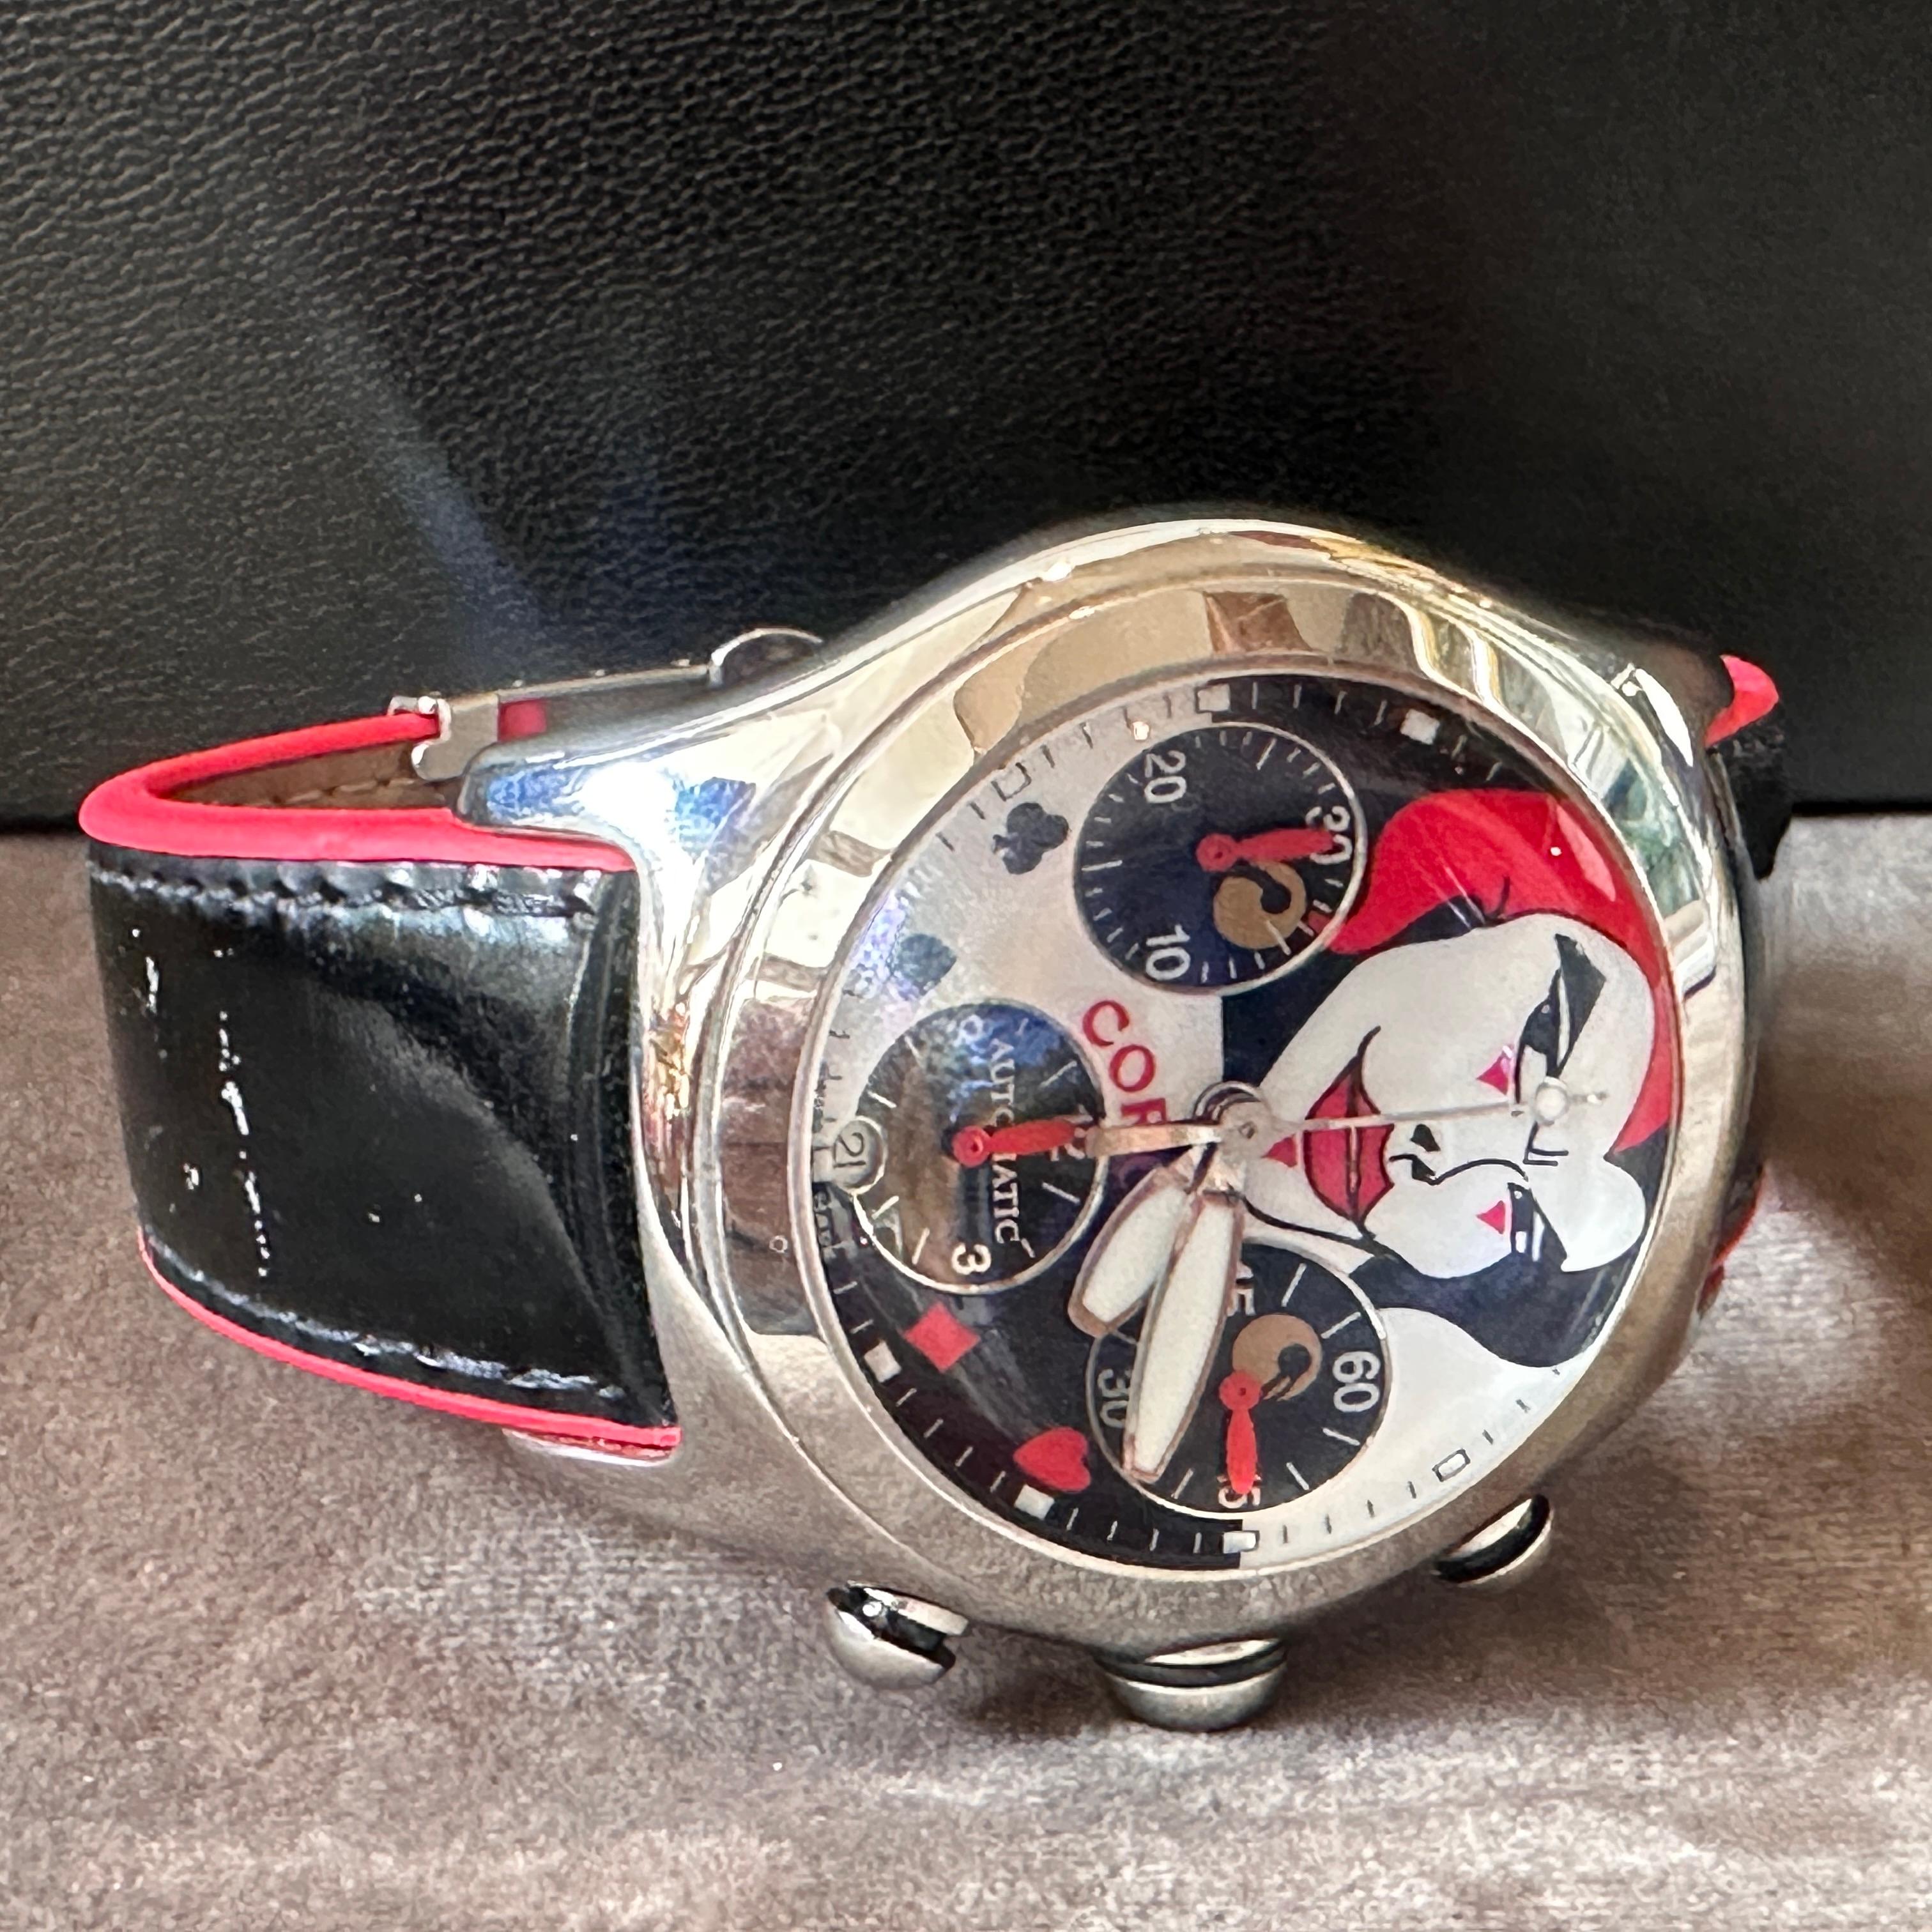 2002 Full Set Joker limited Edition Bubble Chronograph ref. 28524020 by Corum For Sale 3